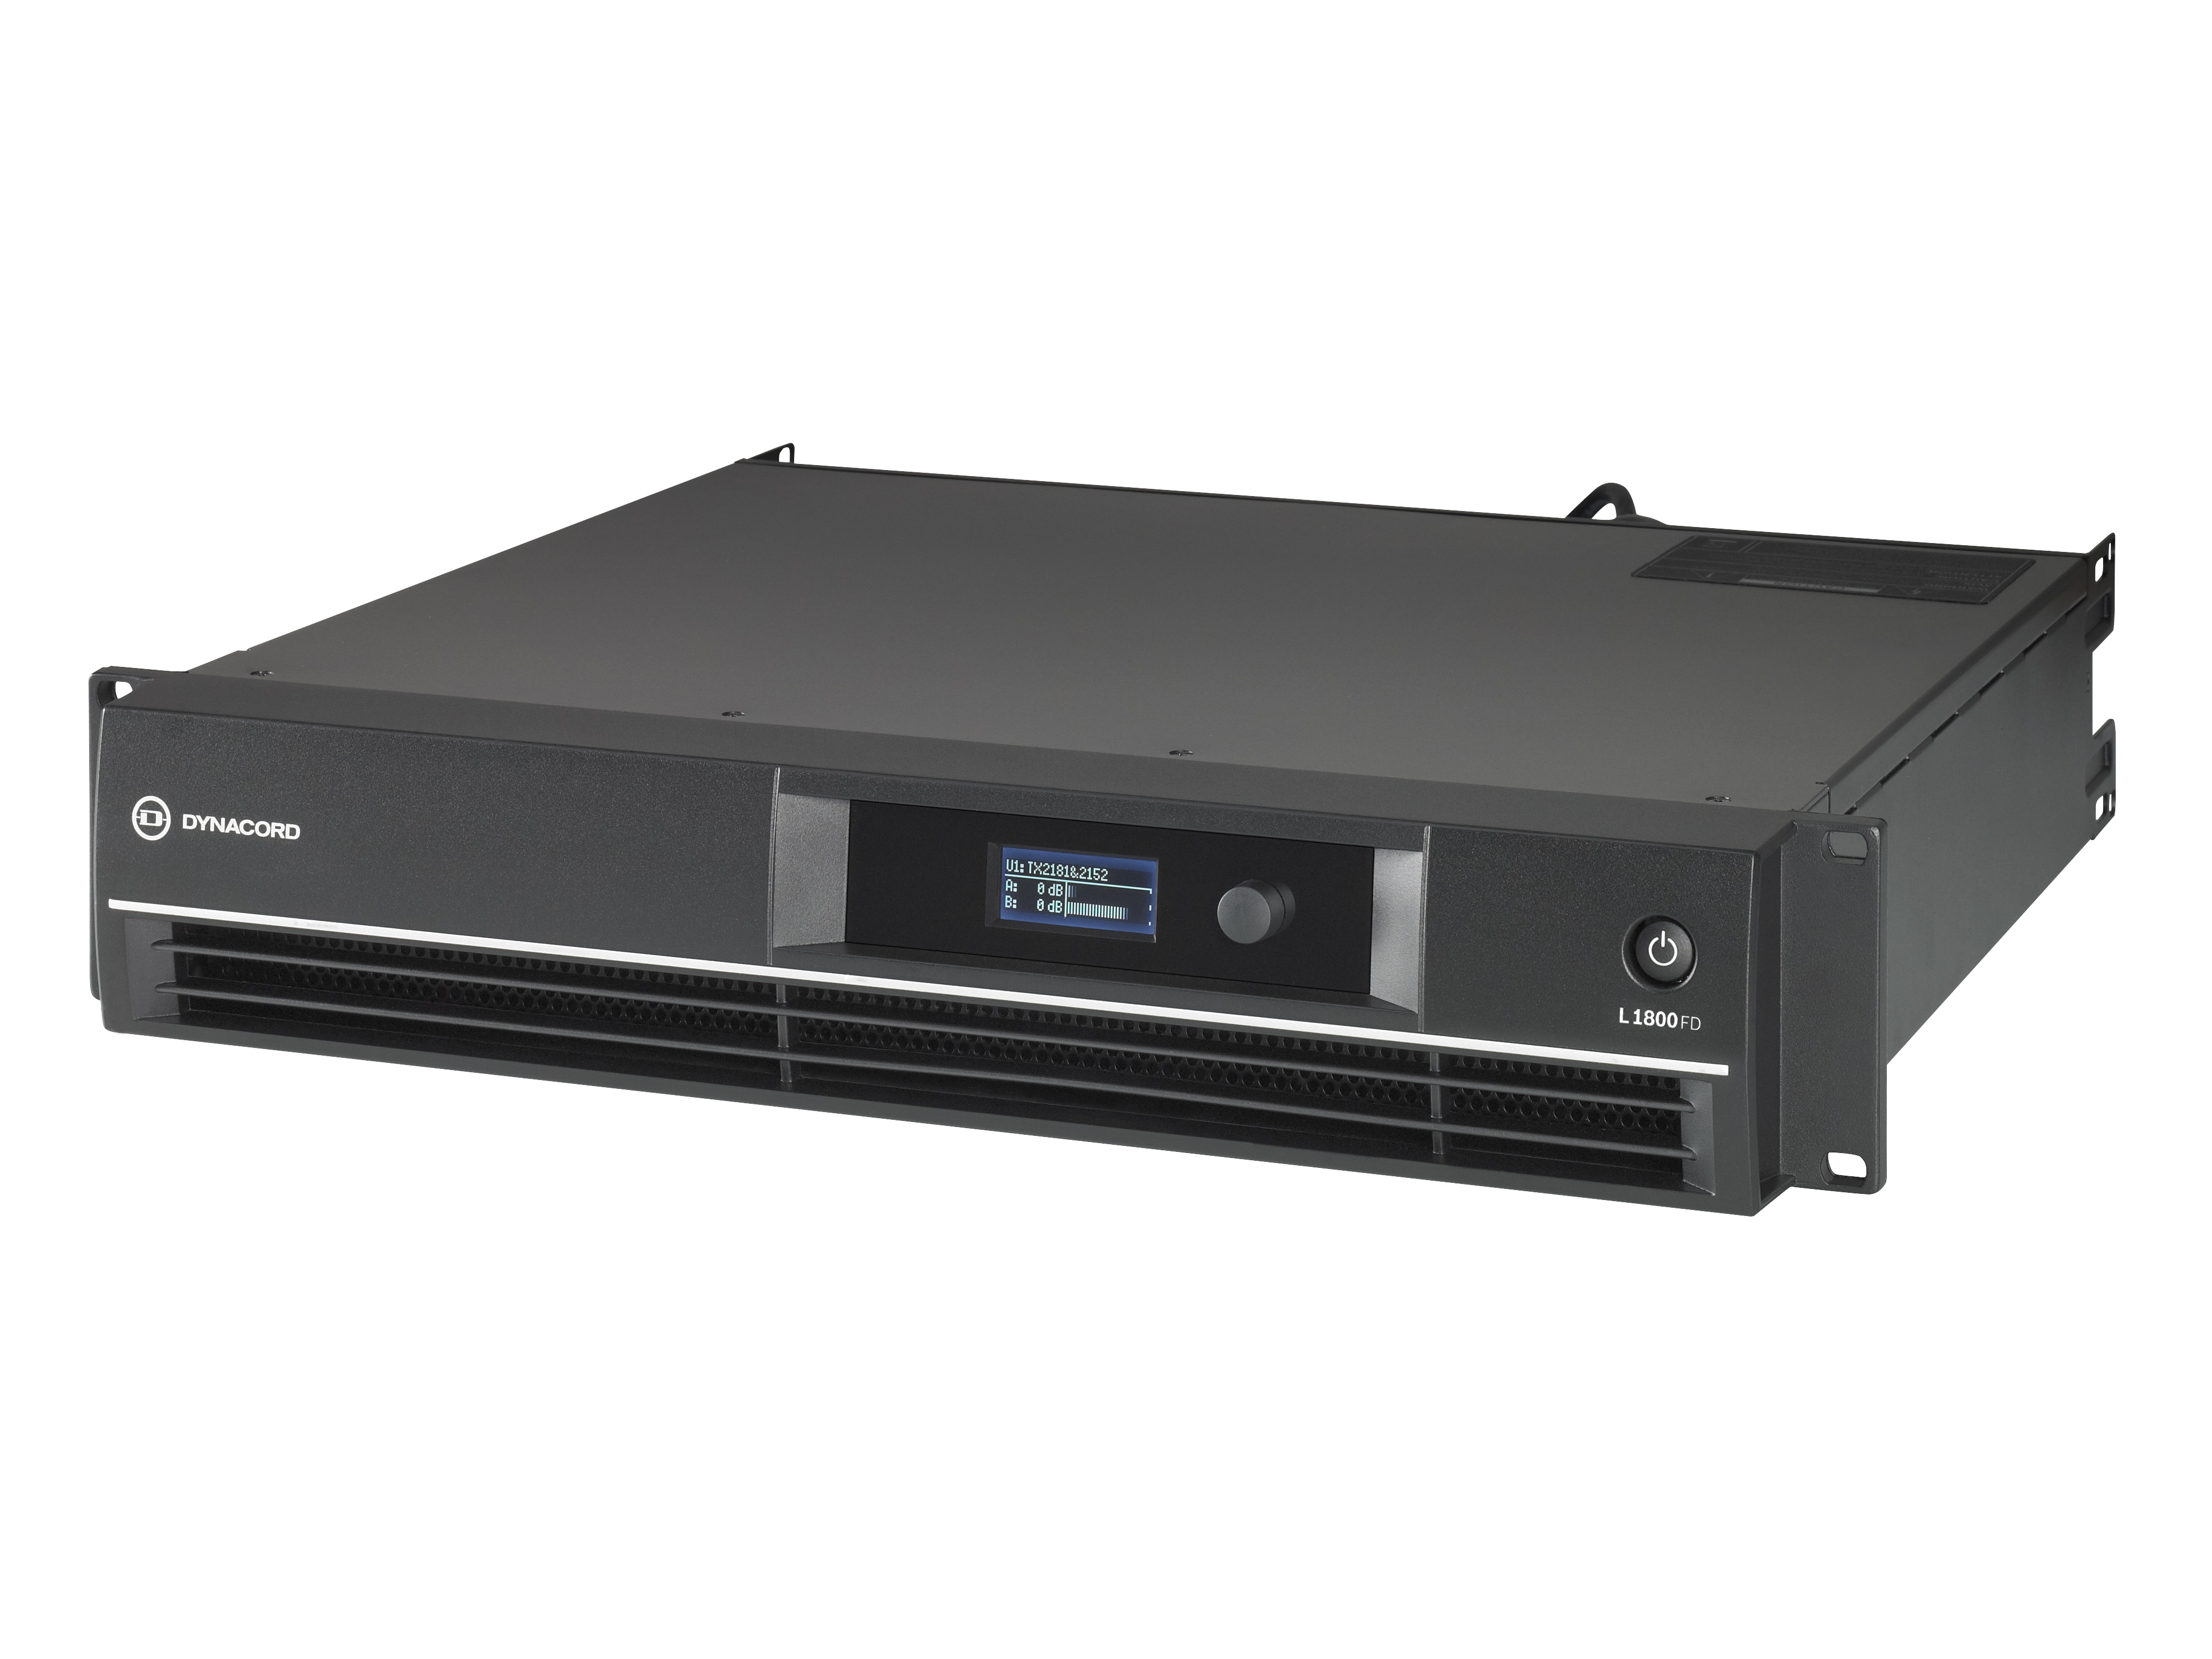 L1800FD-US DSP Power Amplifier 2x950W with FIR Drive/XLR/NL4 Connectors by Dynacord